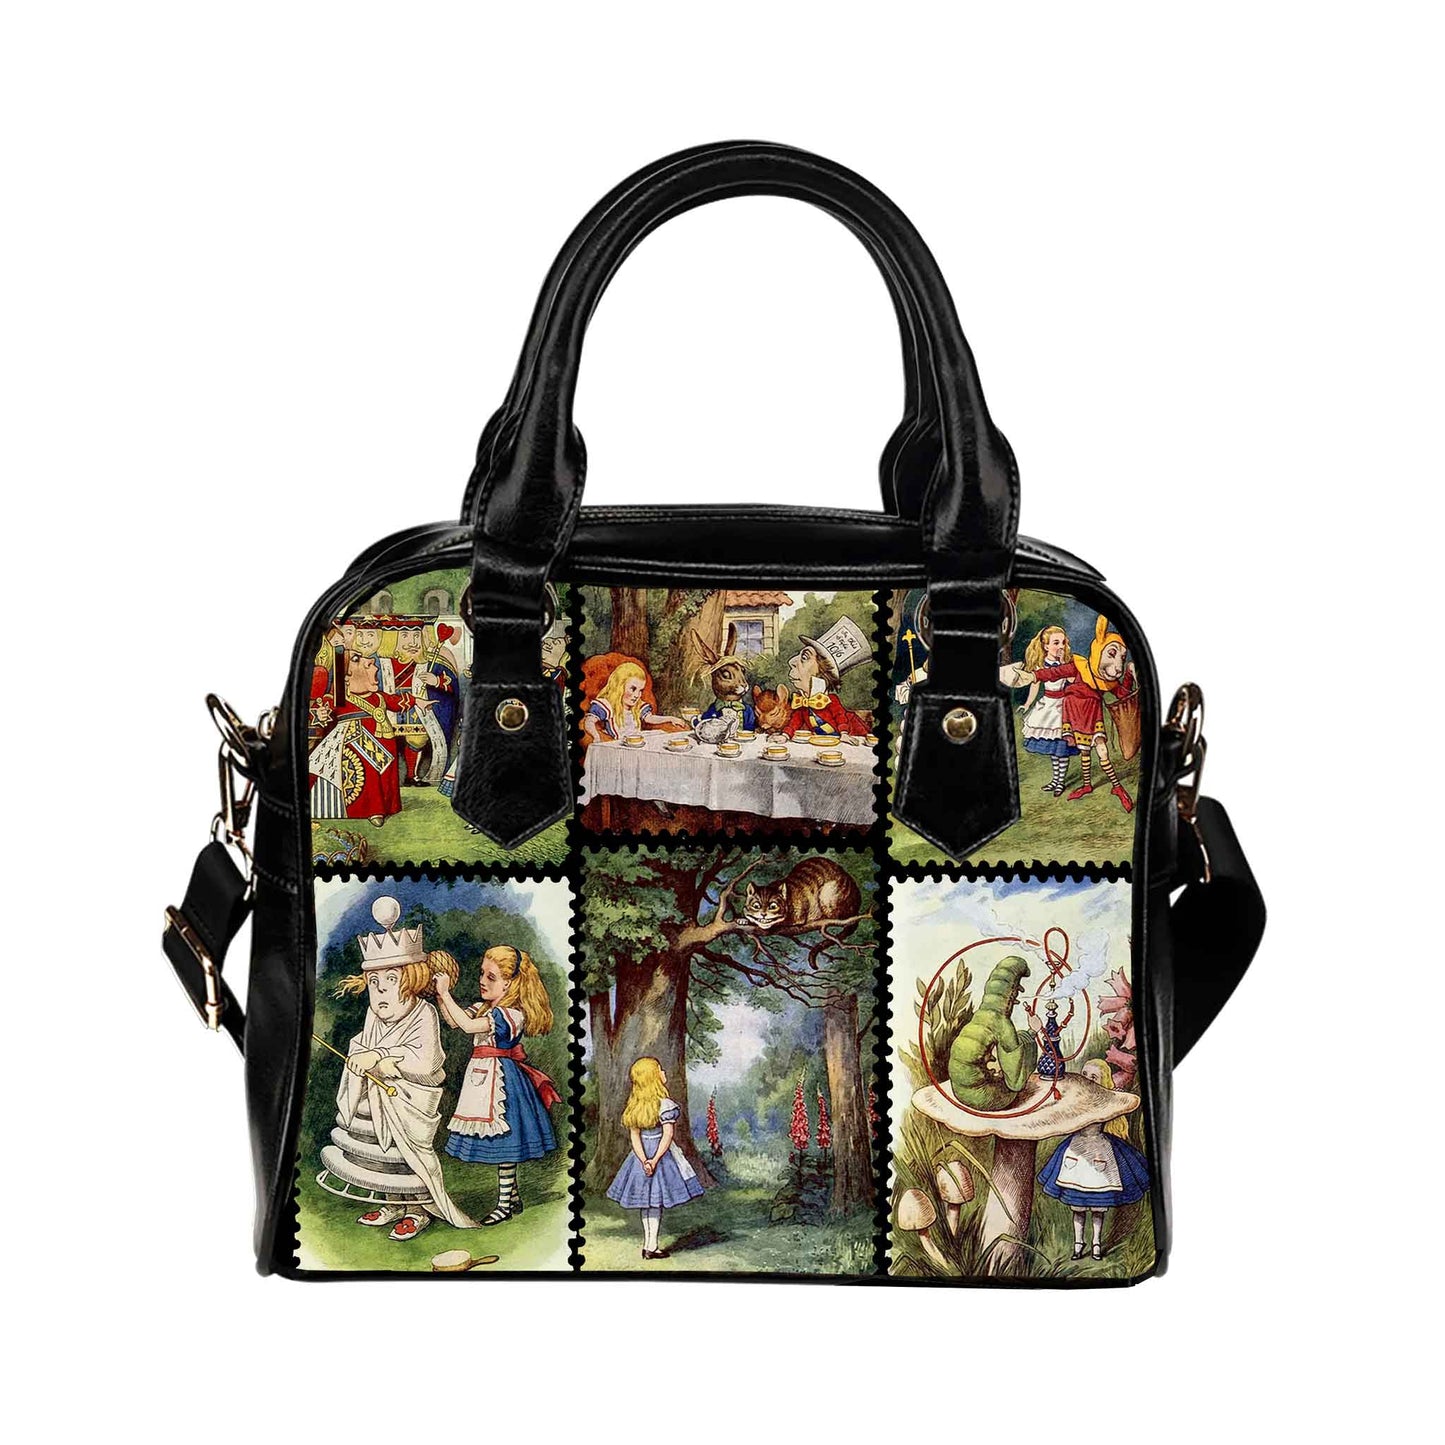 Twelve individual colourised vintage Alice in Wonderland images adorn this very cute and practical faux leather handbag at Gallery Serpentine 3